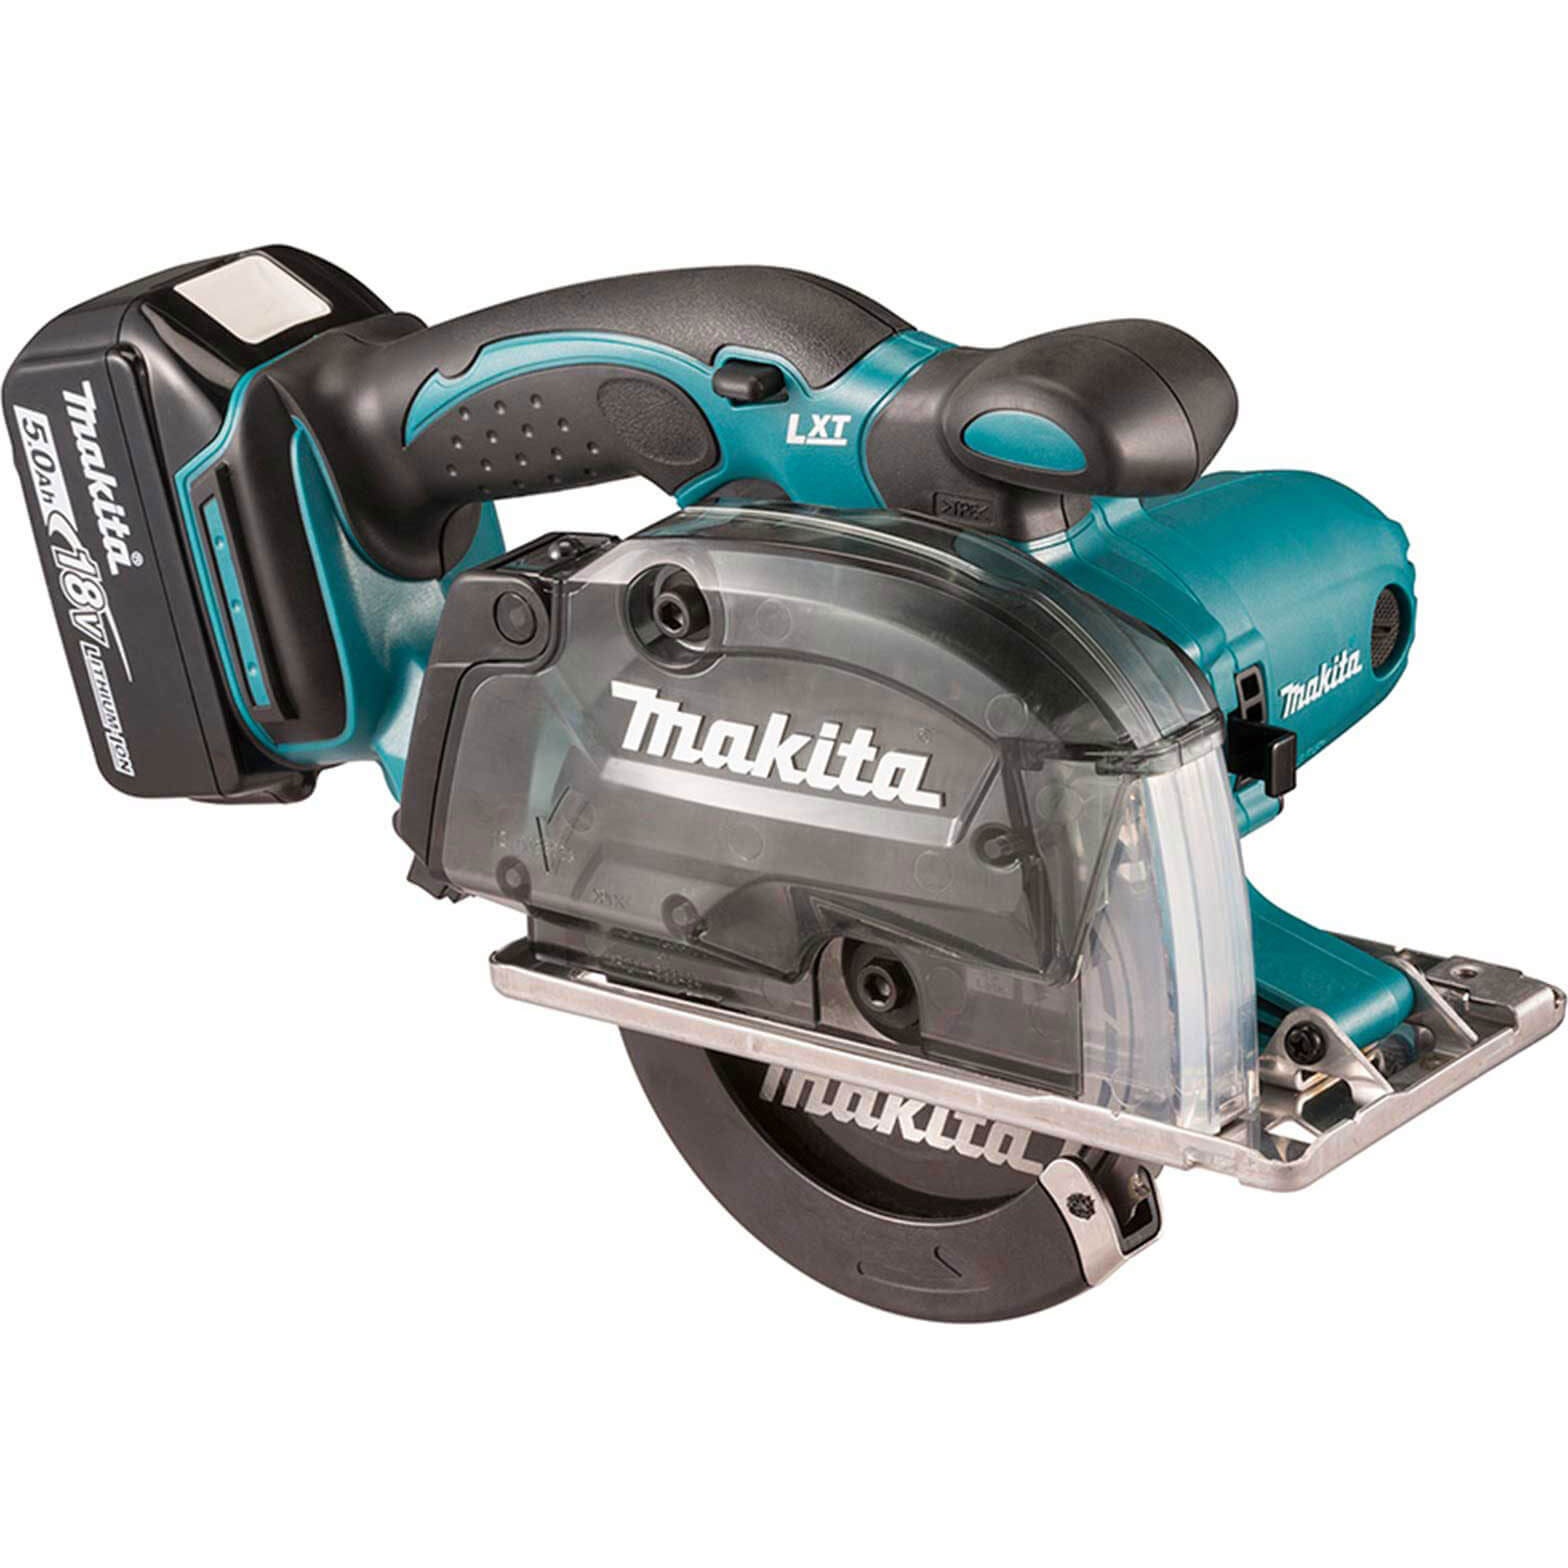 Makita XSC01Z 18V LXT Lithium-Ion Cordless 5-3 8" Metal Cutting Saw, Tool Only - 3